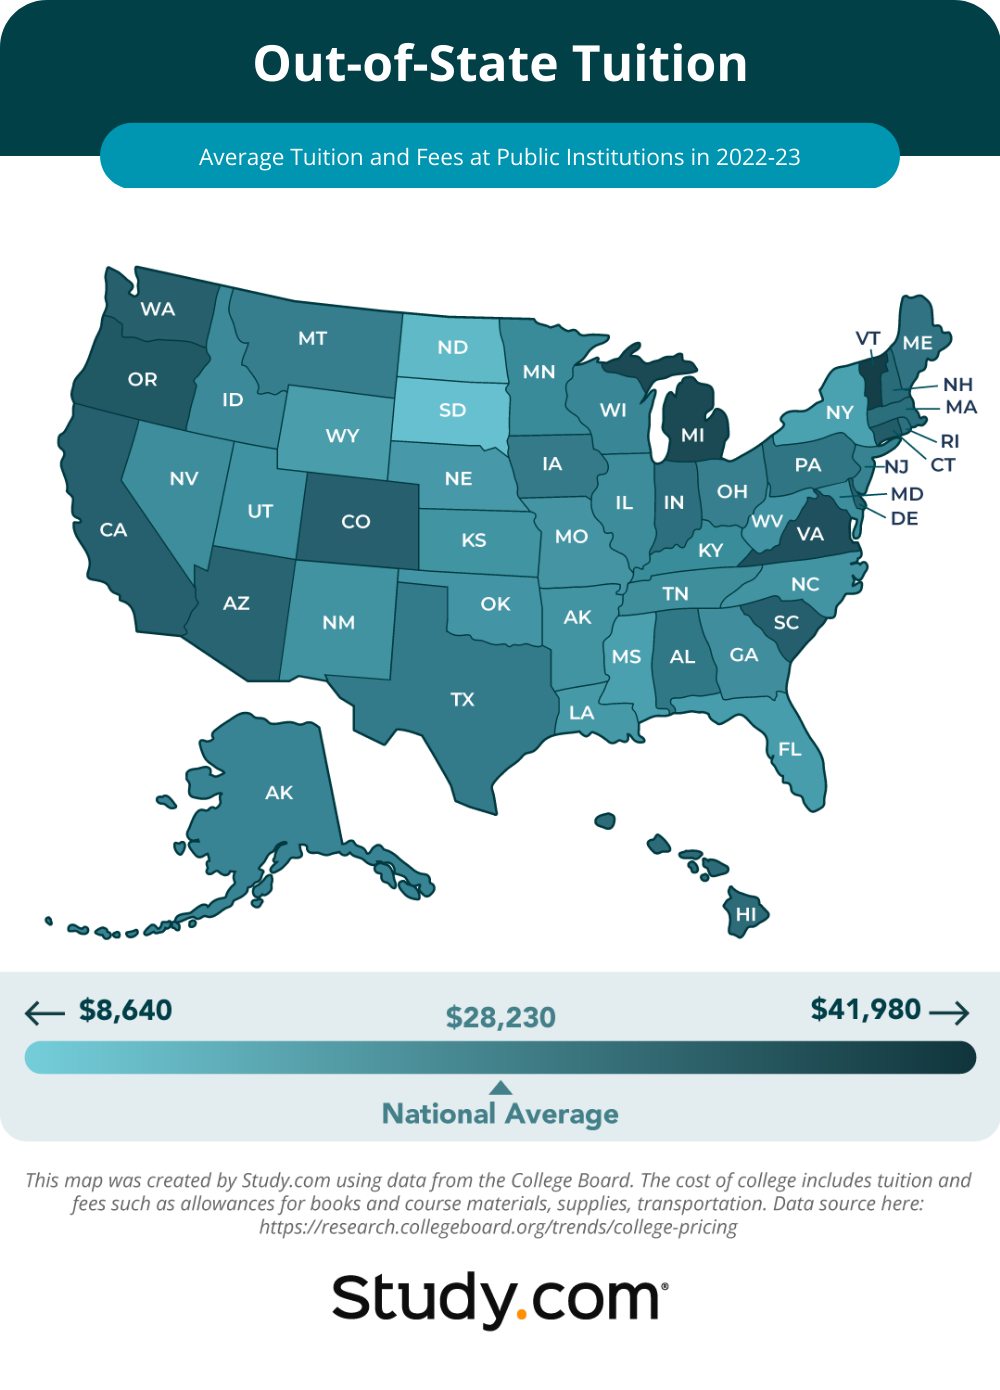 A heat map showing the average out-of-state tuition and fees at public institutions across the U.S. during the 2022-23 academic year.